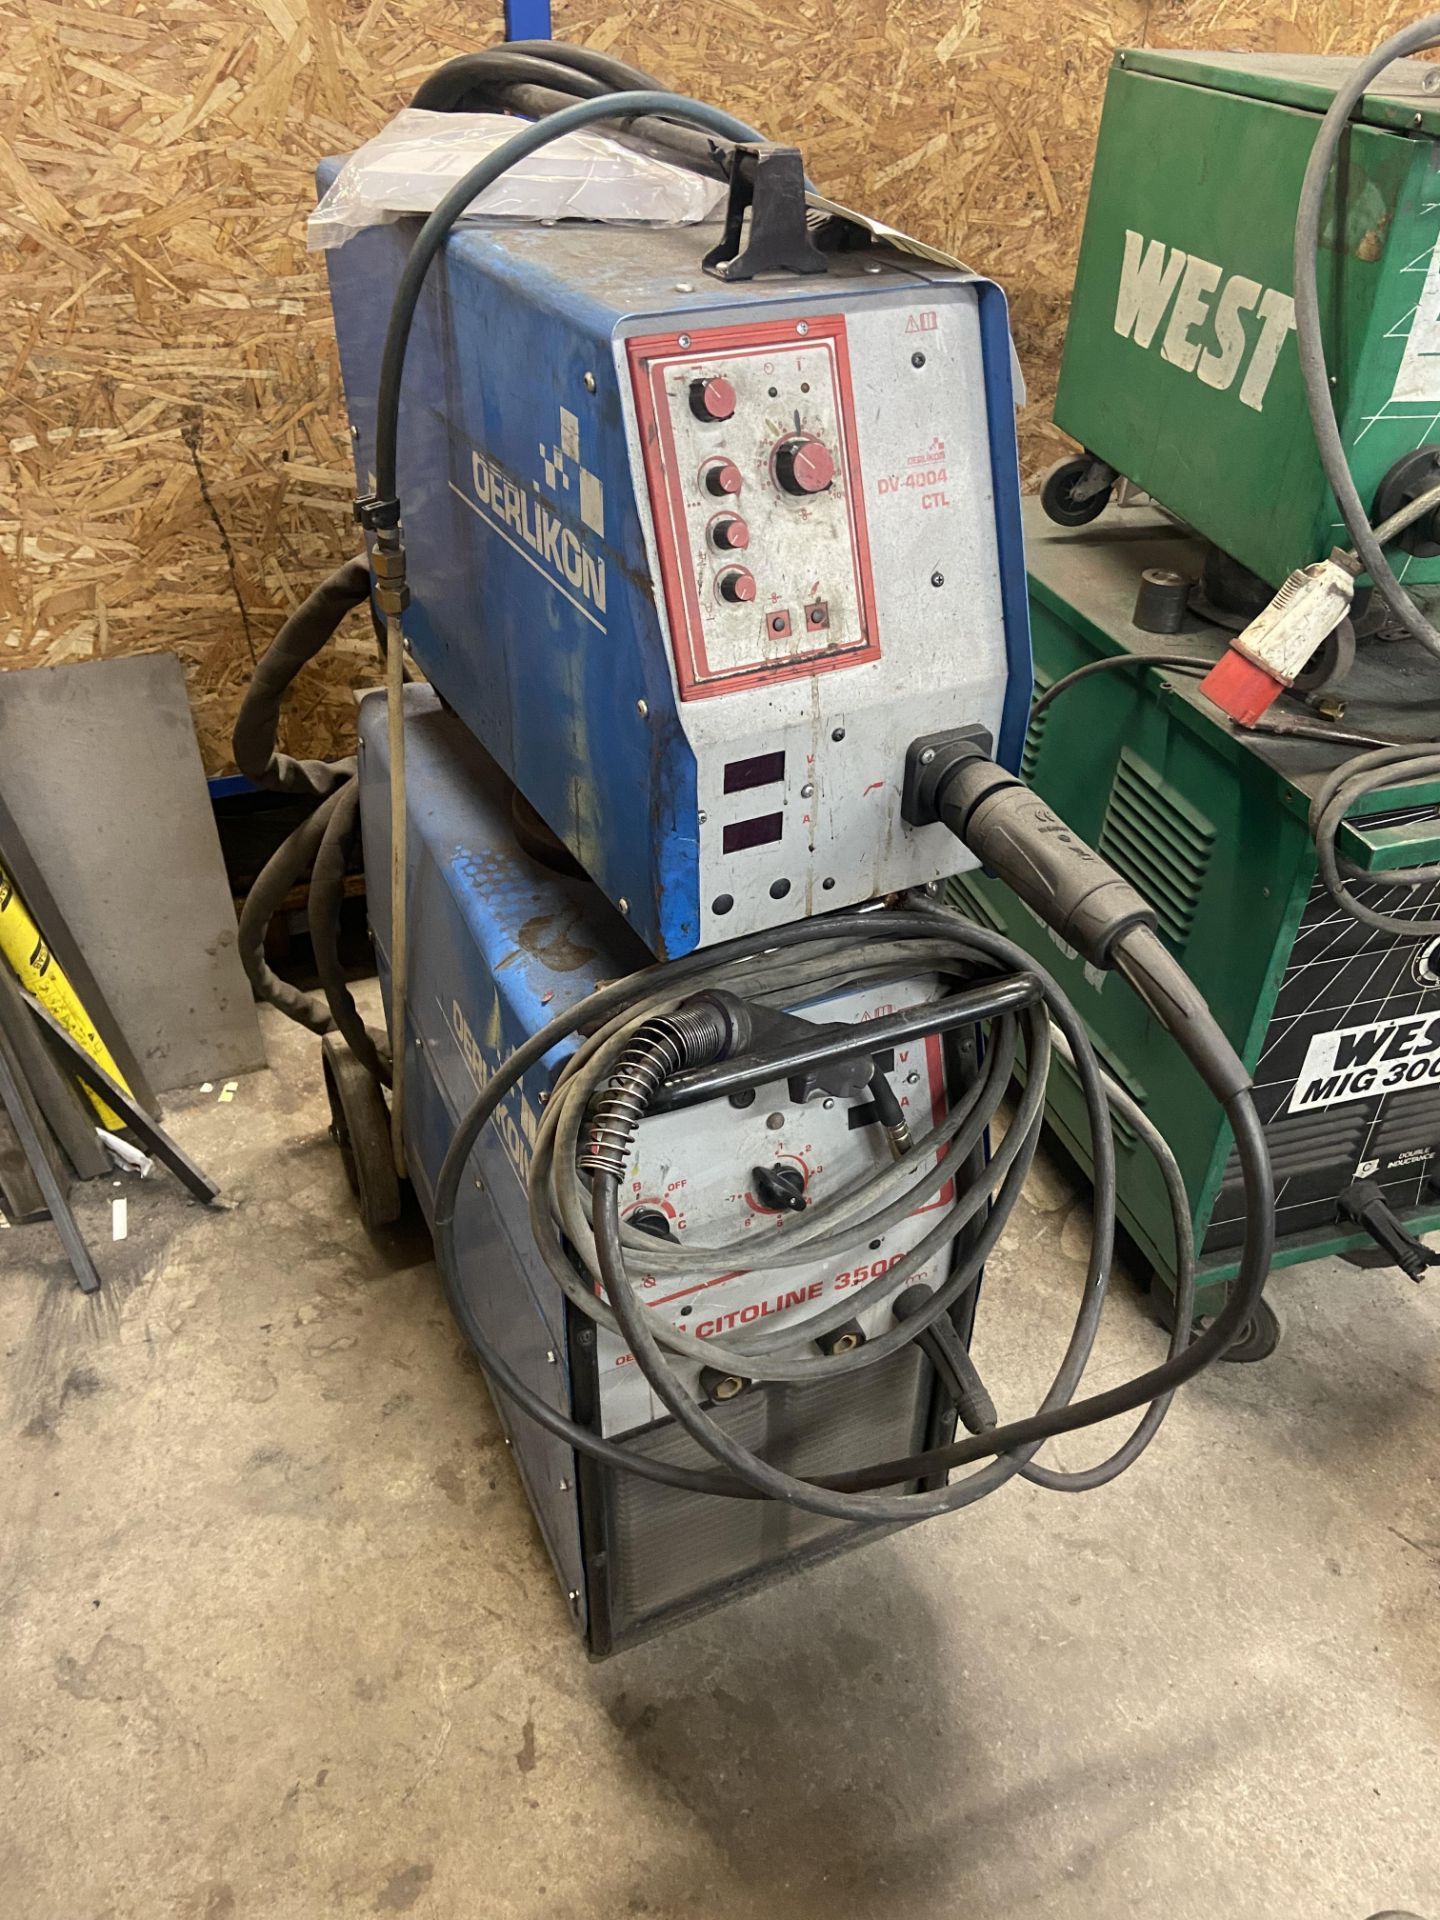 Oerlikon Citoline 3500TS Mig Welding Set, serial no. 216-4862504, with DV4004 CTL wire feed unit